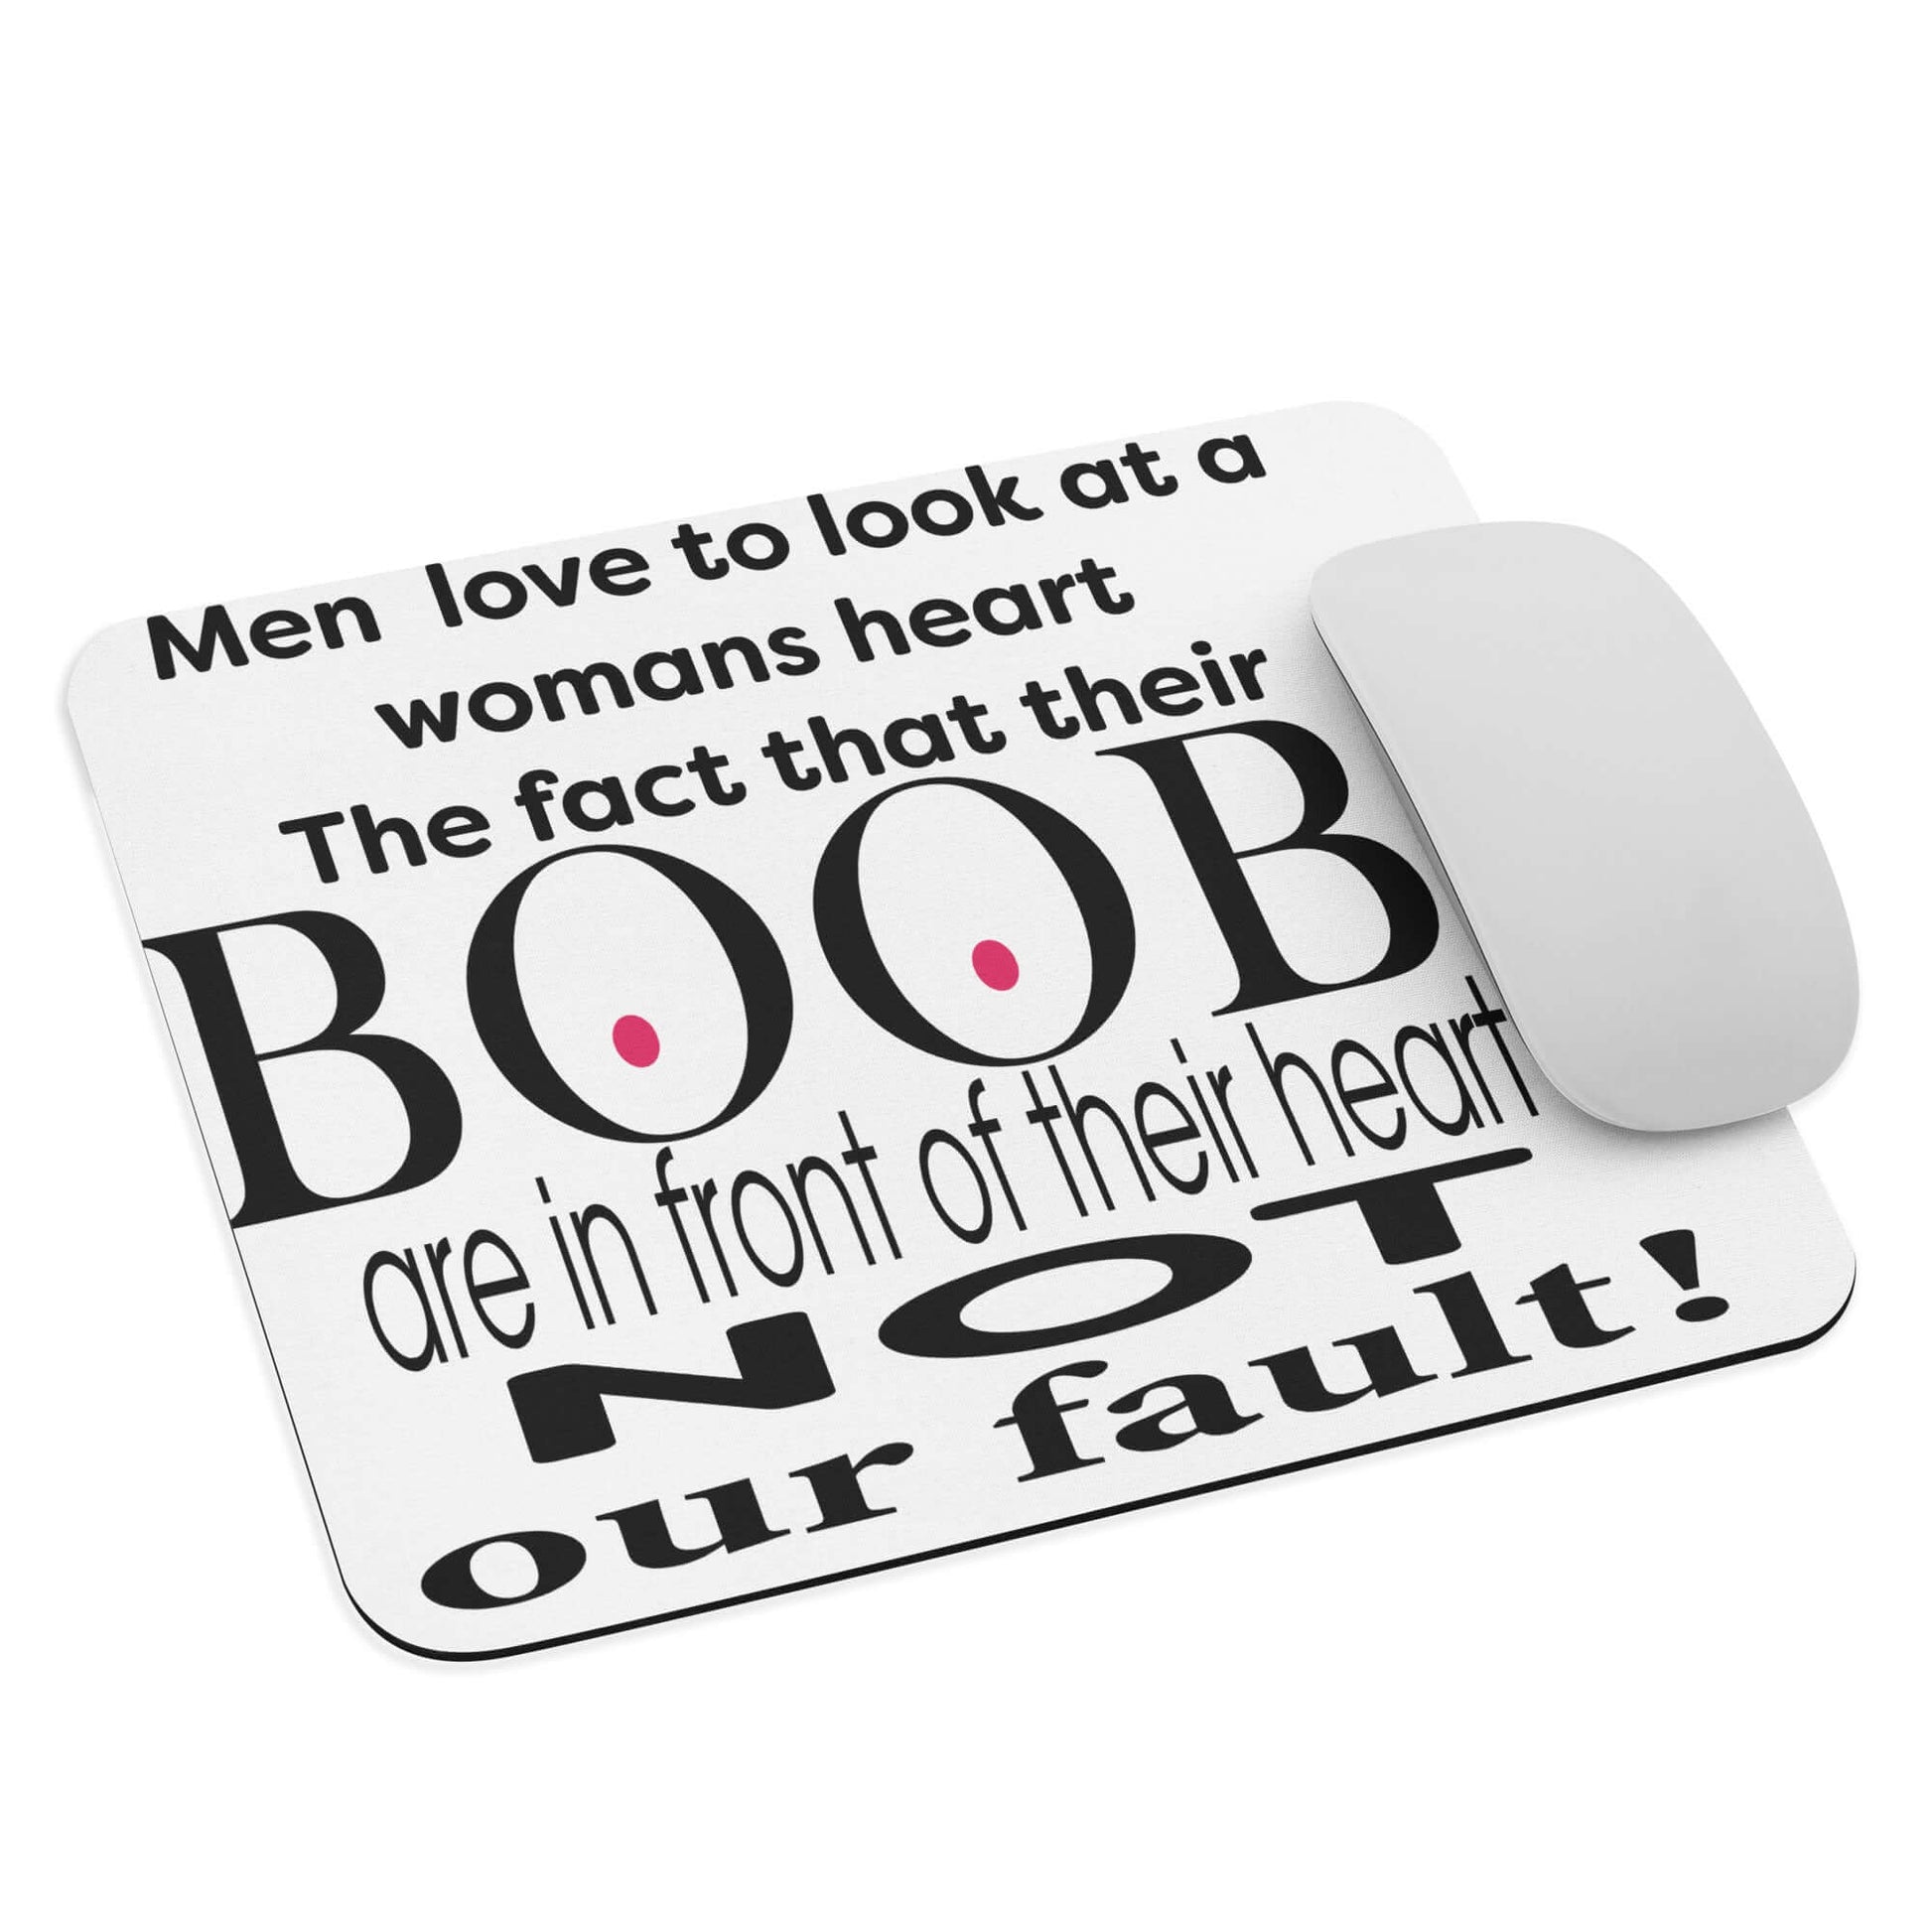 Men love to look at a womans heart. The fact that their BOOBS are in the way is not our fault - Mouse pad boobs dads day fathers day fun bags jigglers jugs knockers melons tits titties